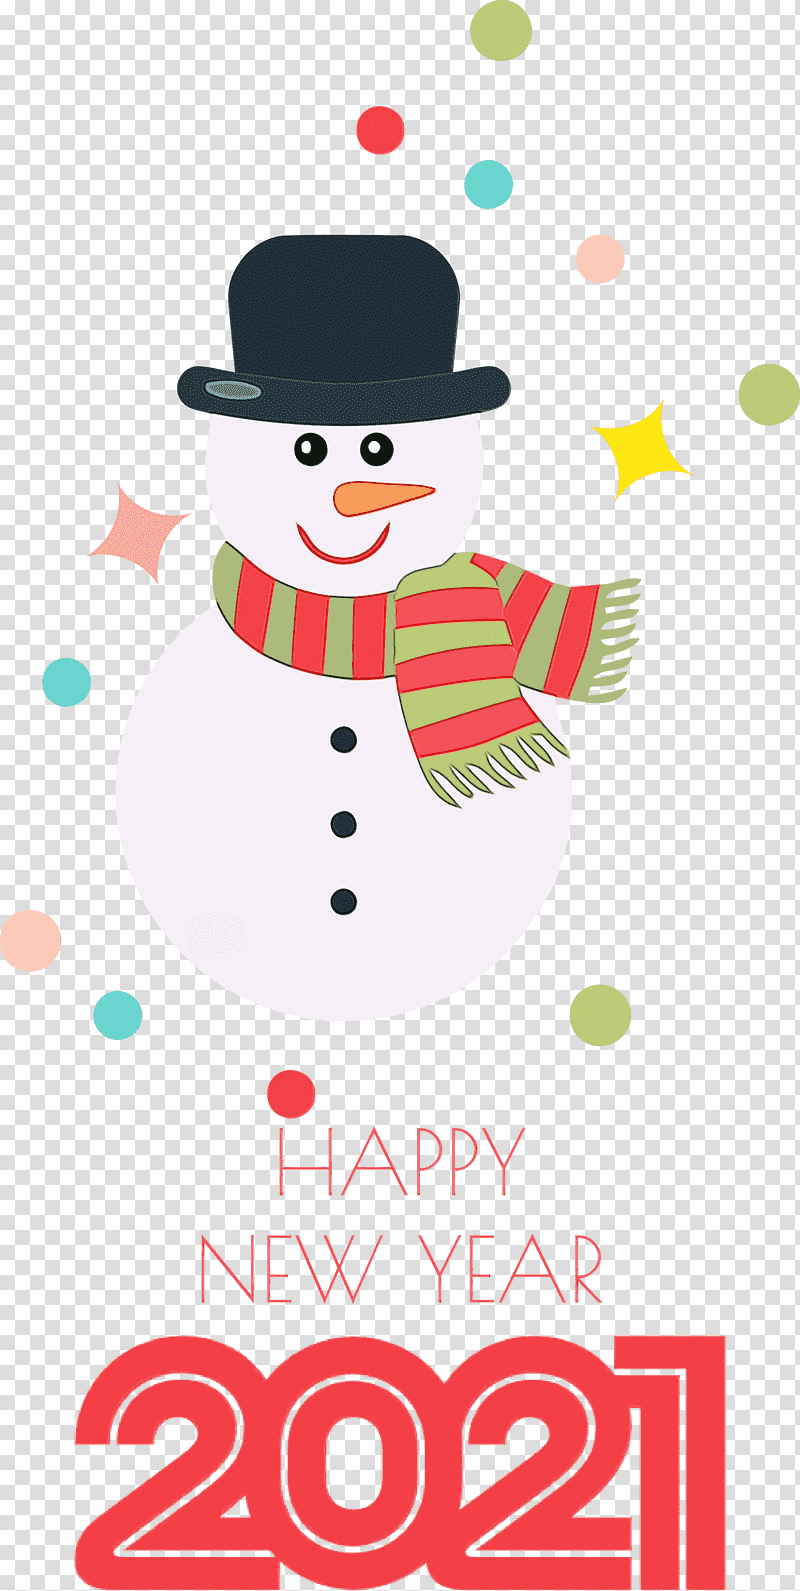 Christmas tree, 2021 Happy New Year, 2021 New Year, Watercolor, Paint, Wet Ink, Christmas Day transparent background PNG clipart